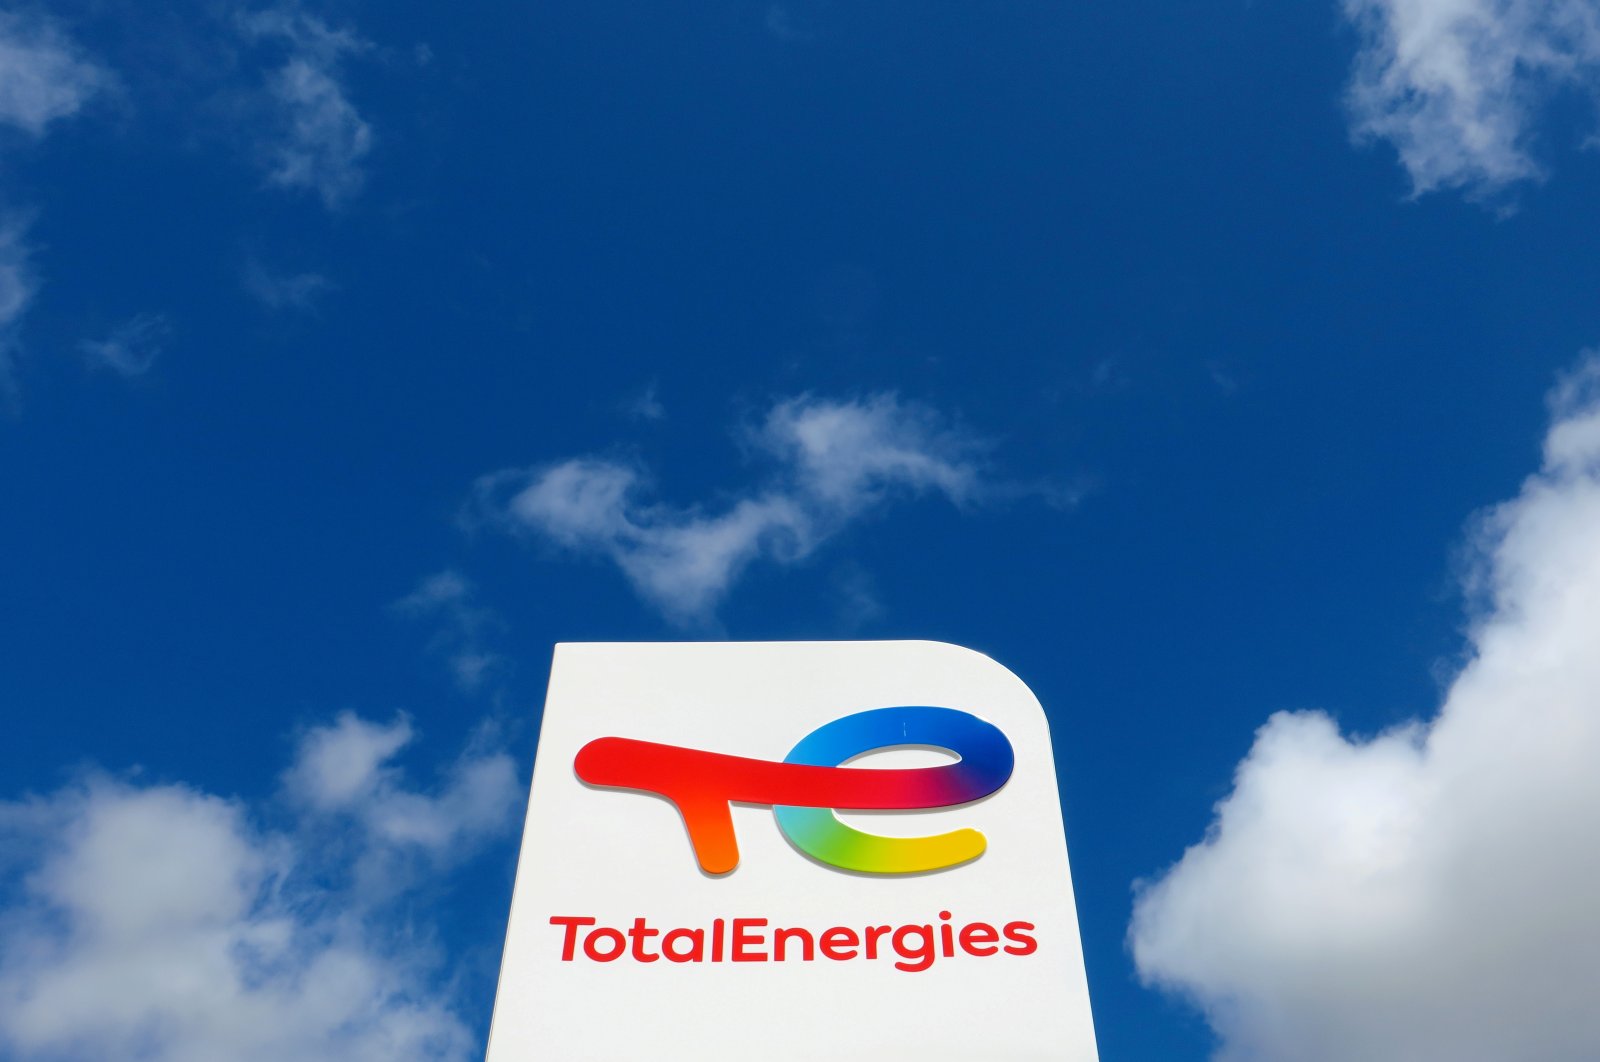 The logo of French oil and gas company TotalEnergies is seen at a petrol station in Ressons, France, Aug. 6, 2021. (Reuters Photo)